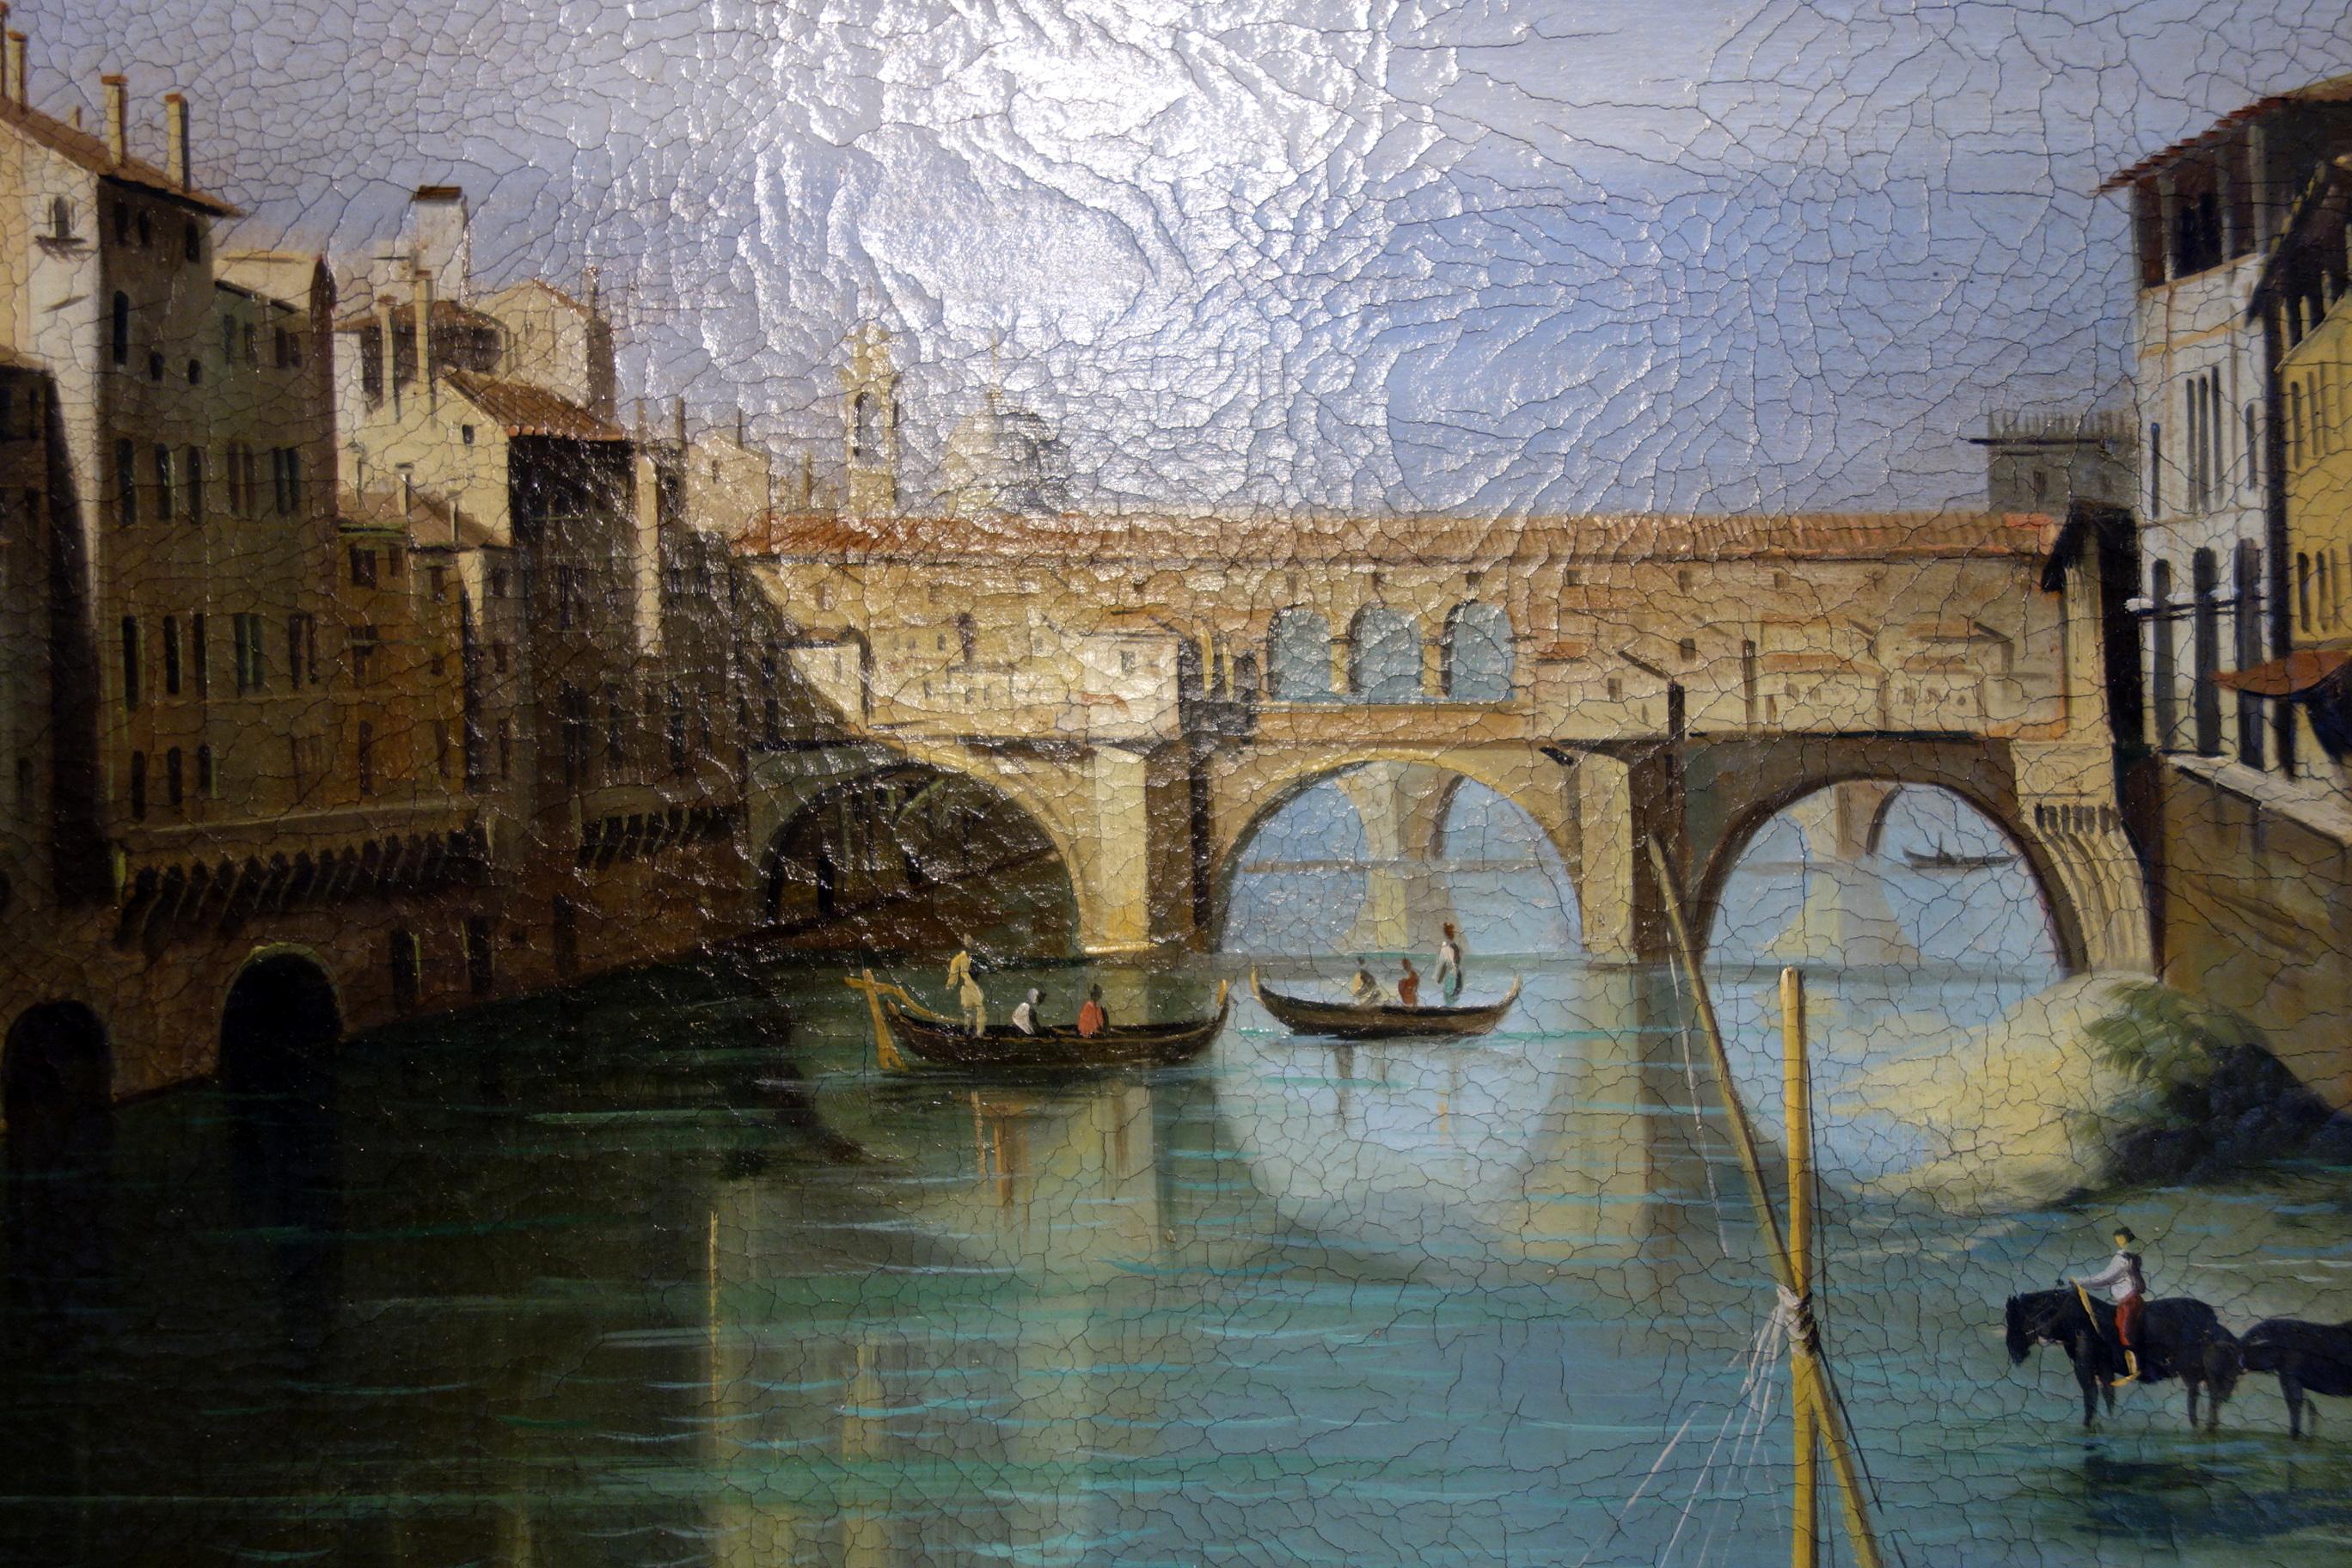 Hand-Painted 19th Century Renaissance Style Painting of Ponte Vecchio, Florence 1 of 3 in Set